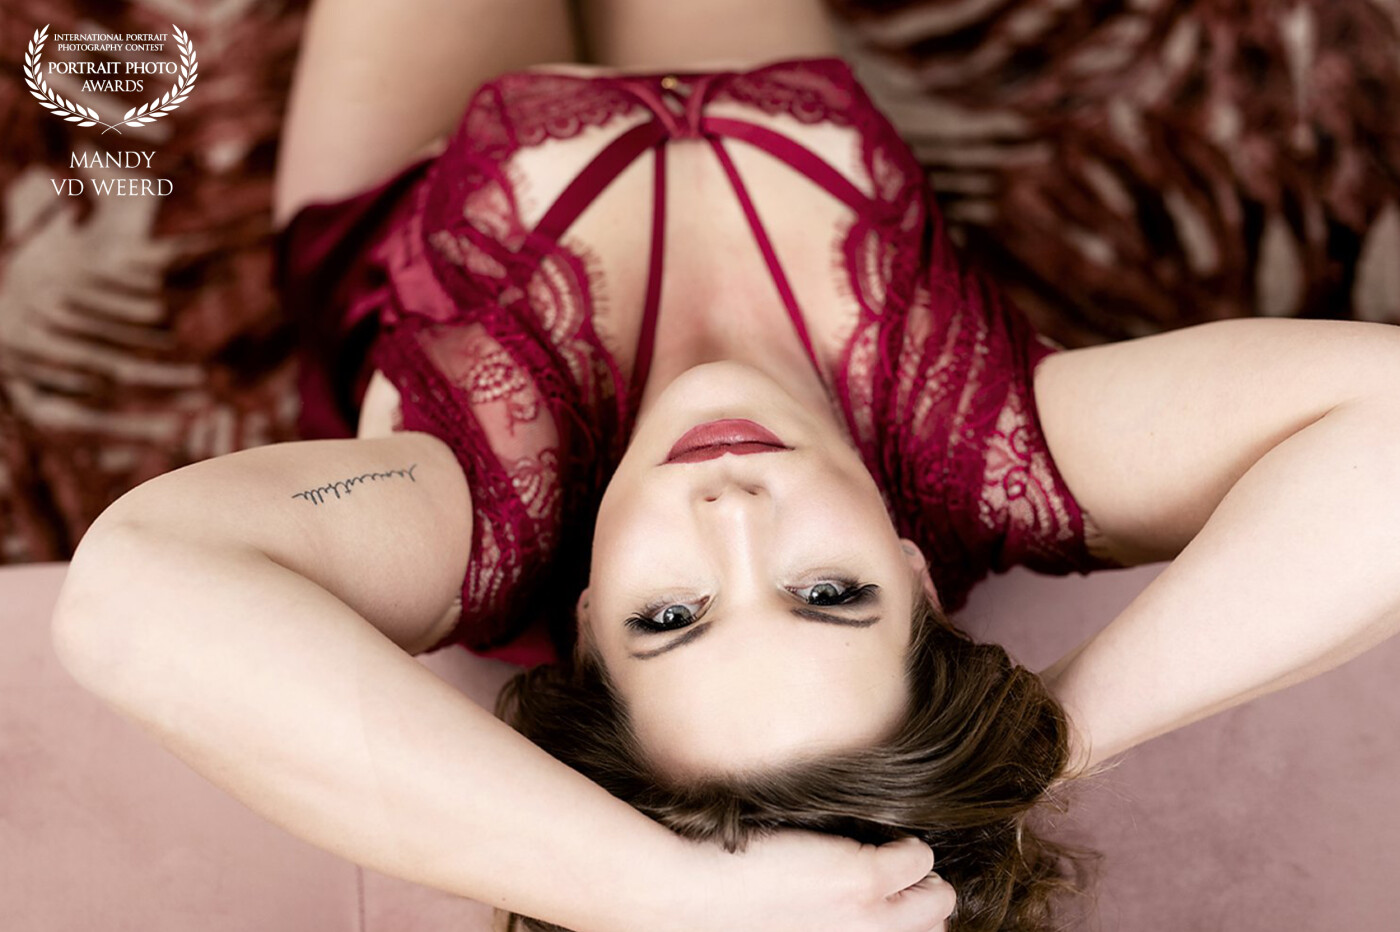 Boudoir photography<br />
This lady came for beautiful boudoir photos<br />
and how well she did!